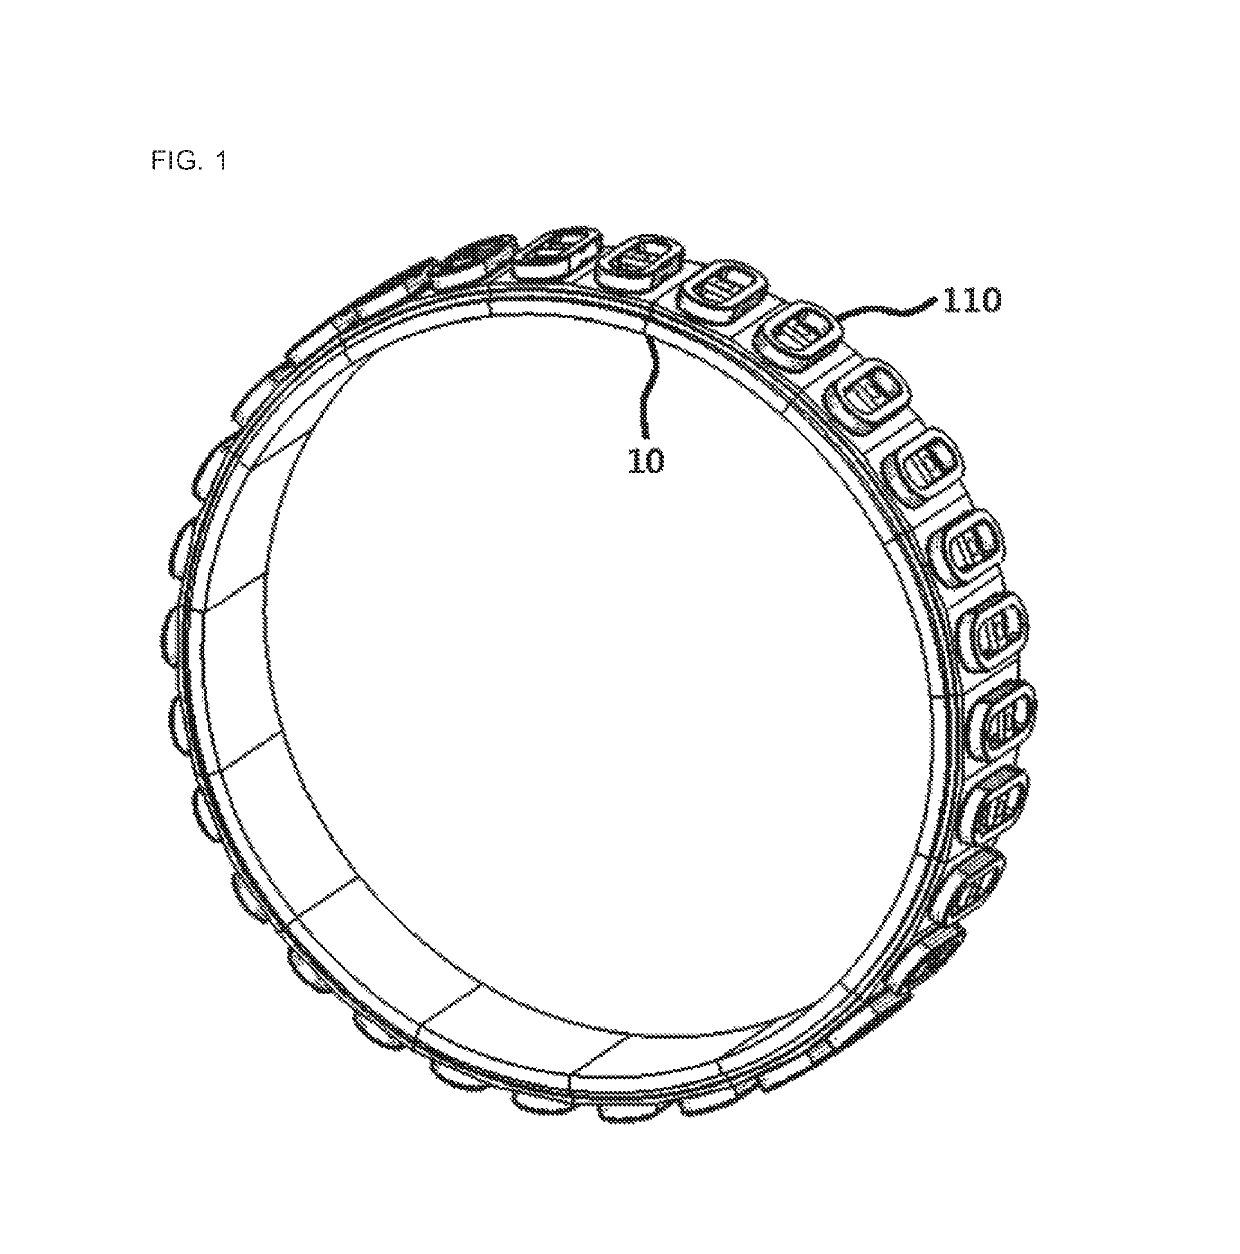 Flexible support apparatus for superconducting magnet in superconducting rotating machine